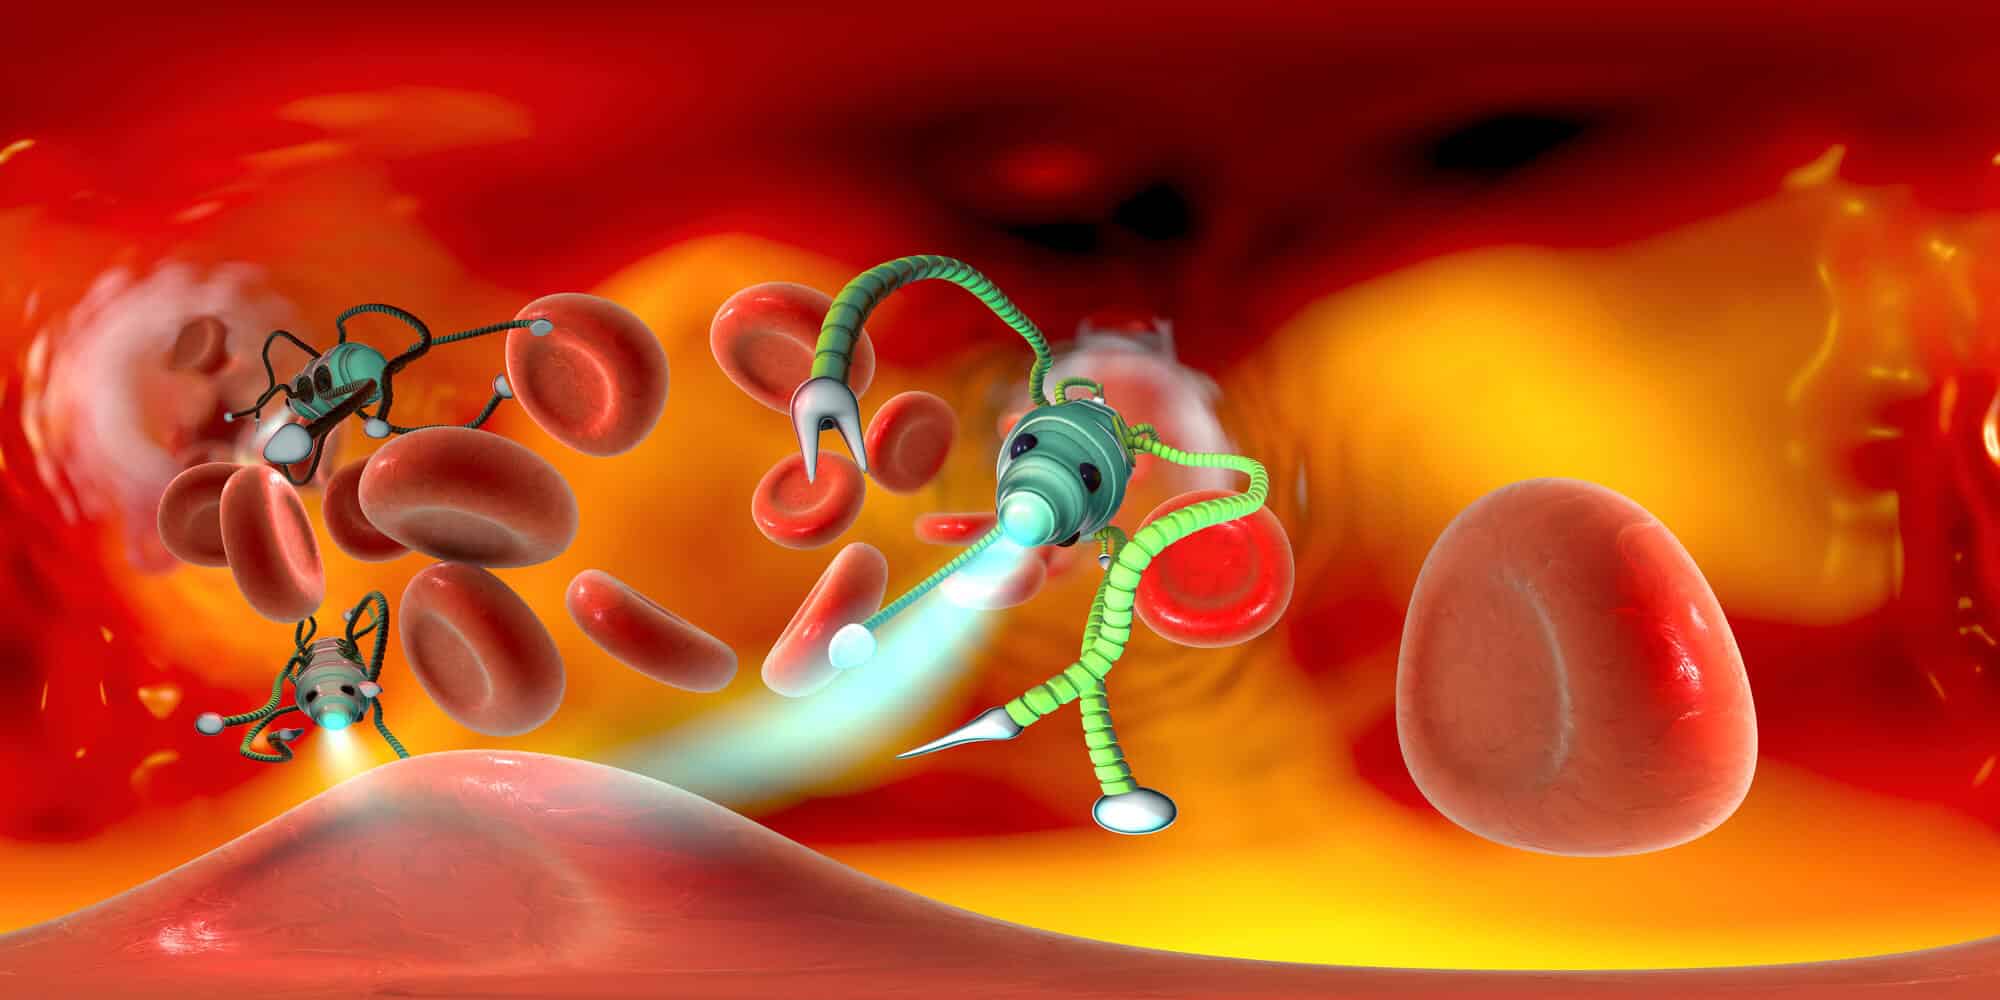 Micro robots fight bacteria inside the body. Image from a virtual reality simulation. Image: depositphotos.com